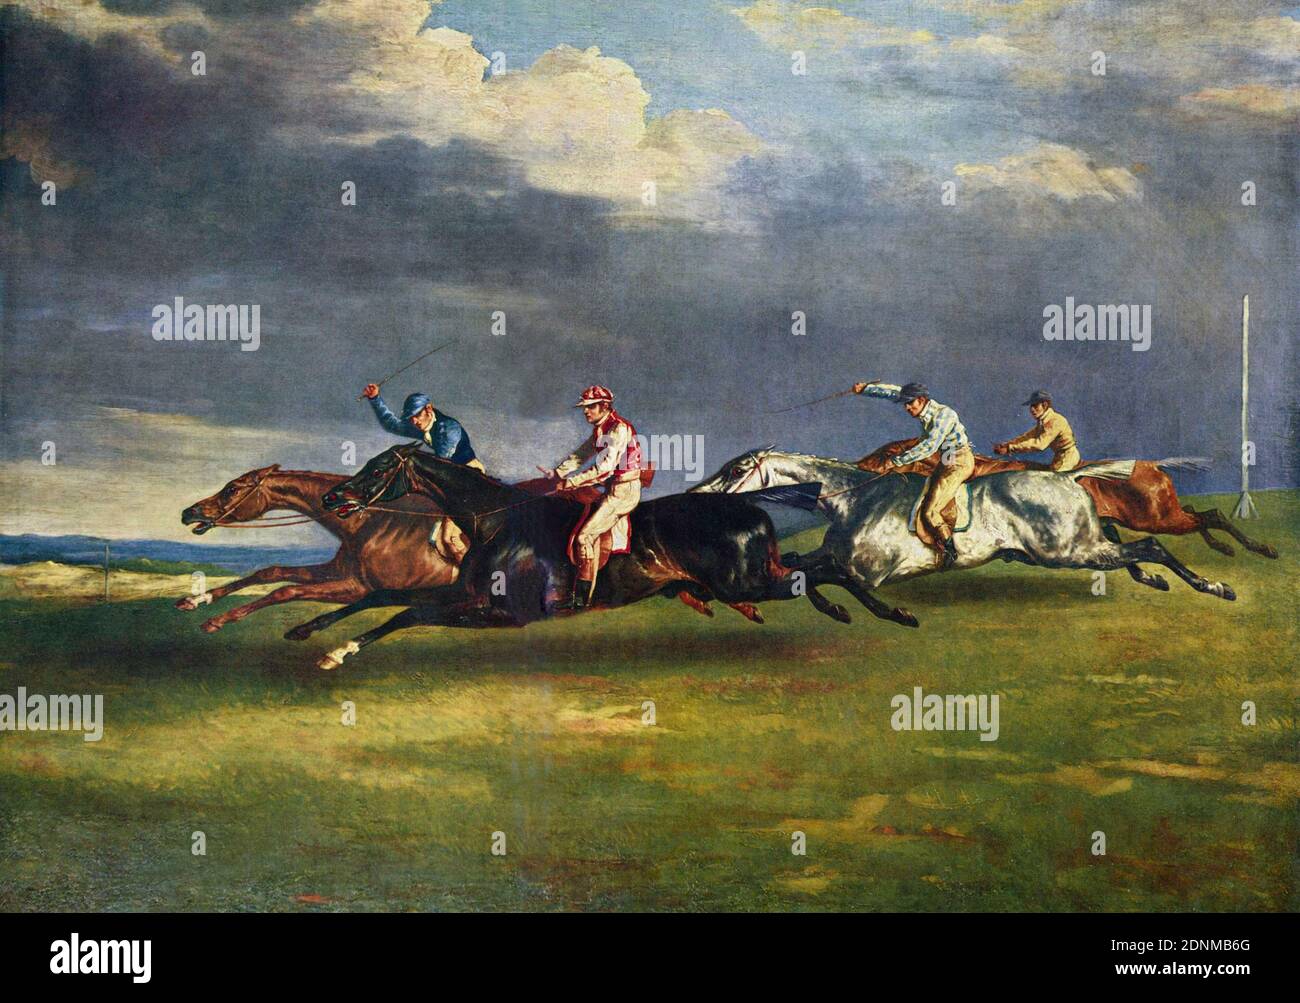 The Epsom Derby, painting by Théodore Géricault, 1821 Stock Photo